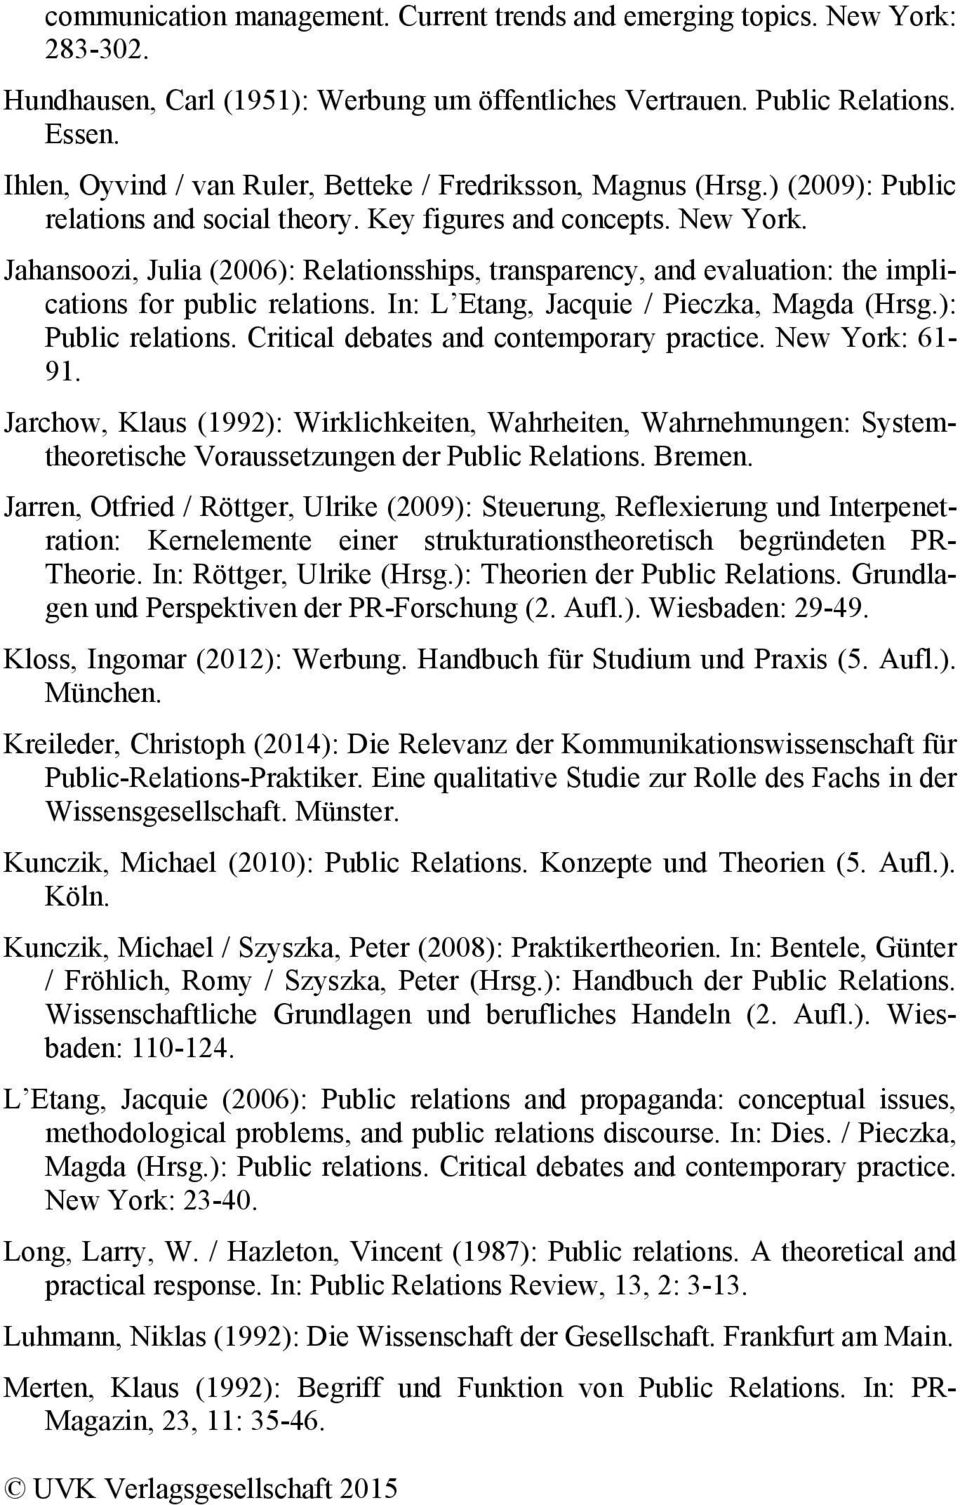 Jahansoozi, Julia (2006): Relationsships, transparency, and evaluation: the implications for public relations. In: L Etang, Jacquie / Pieczka, Magda (Hrsg.): Public relations.